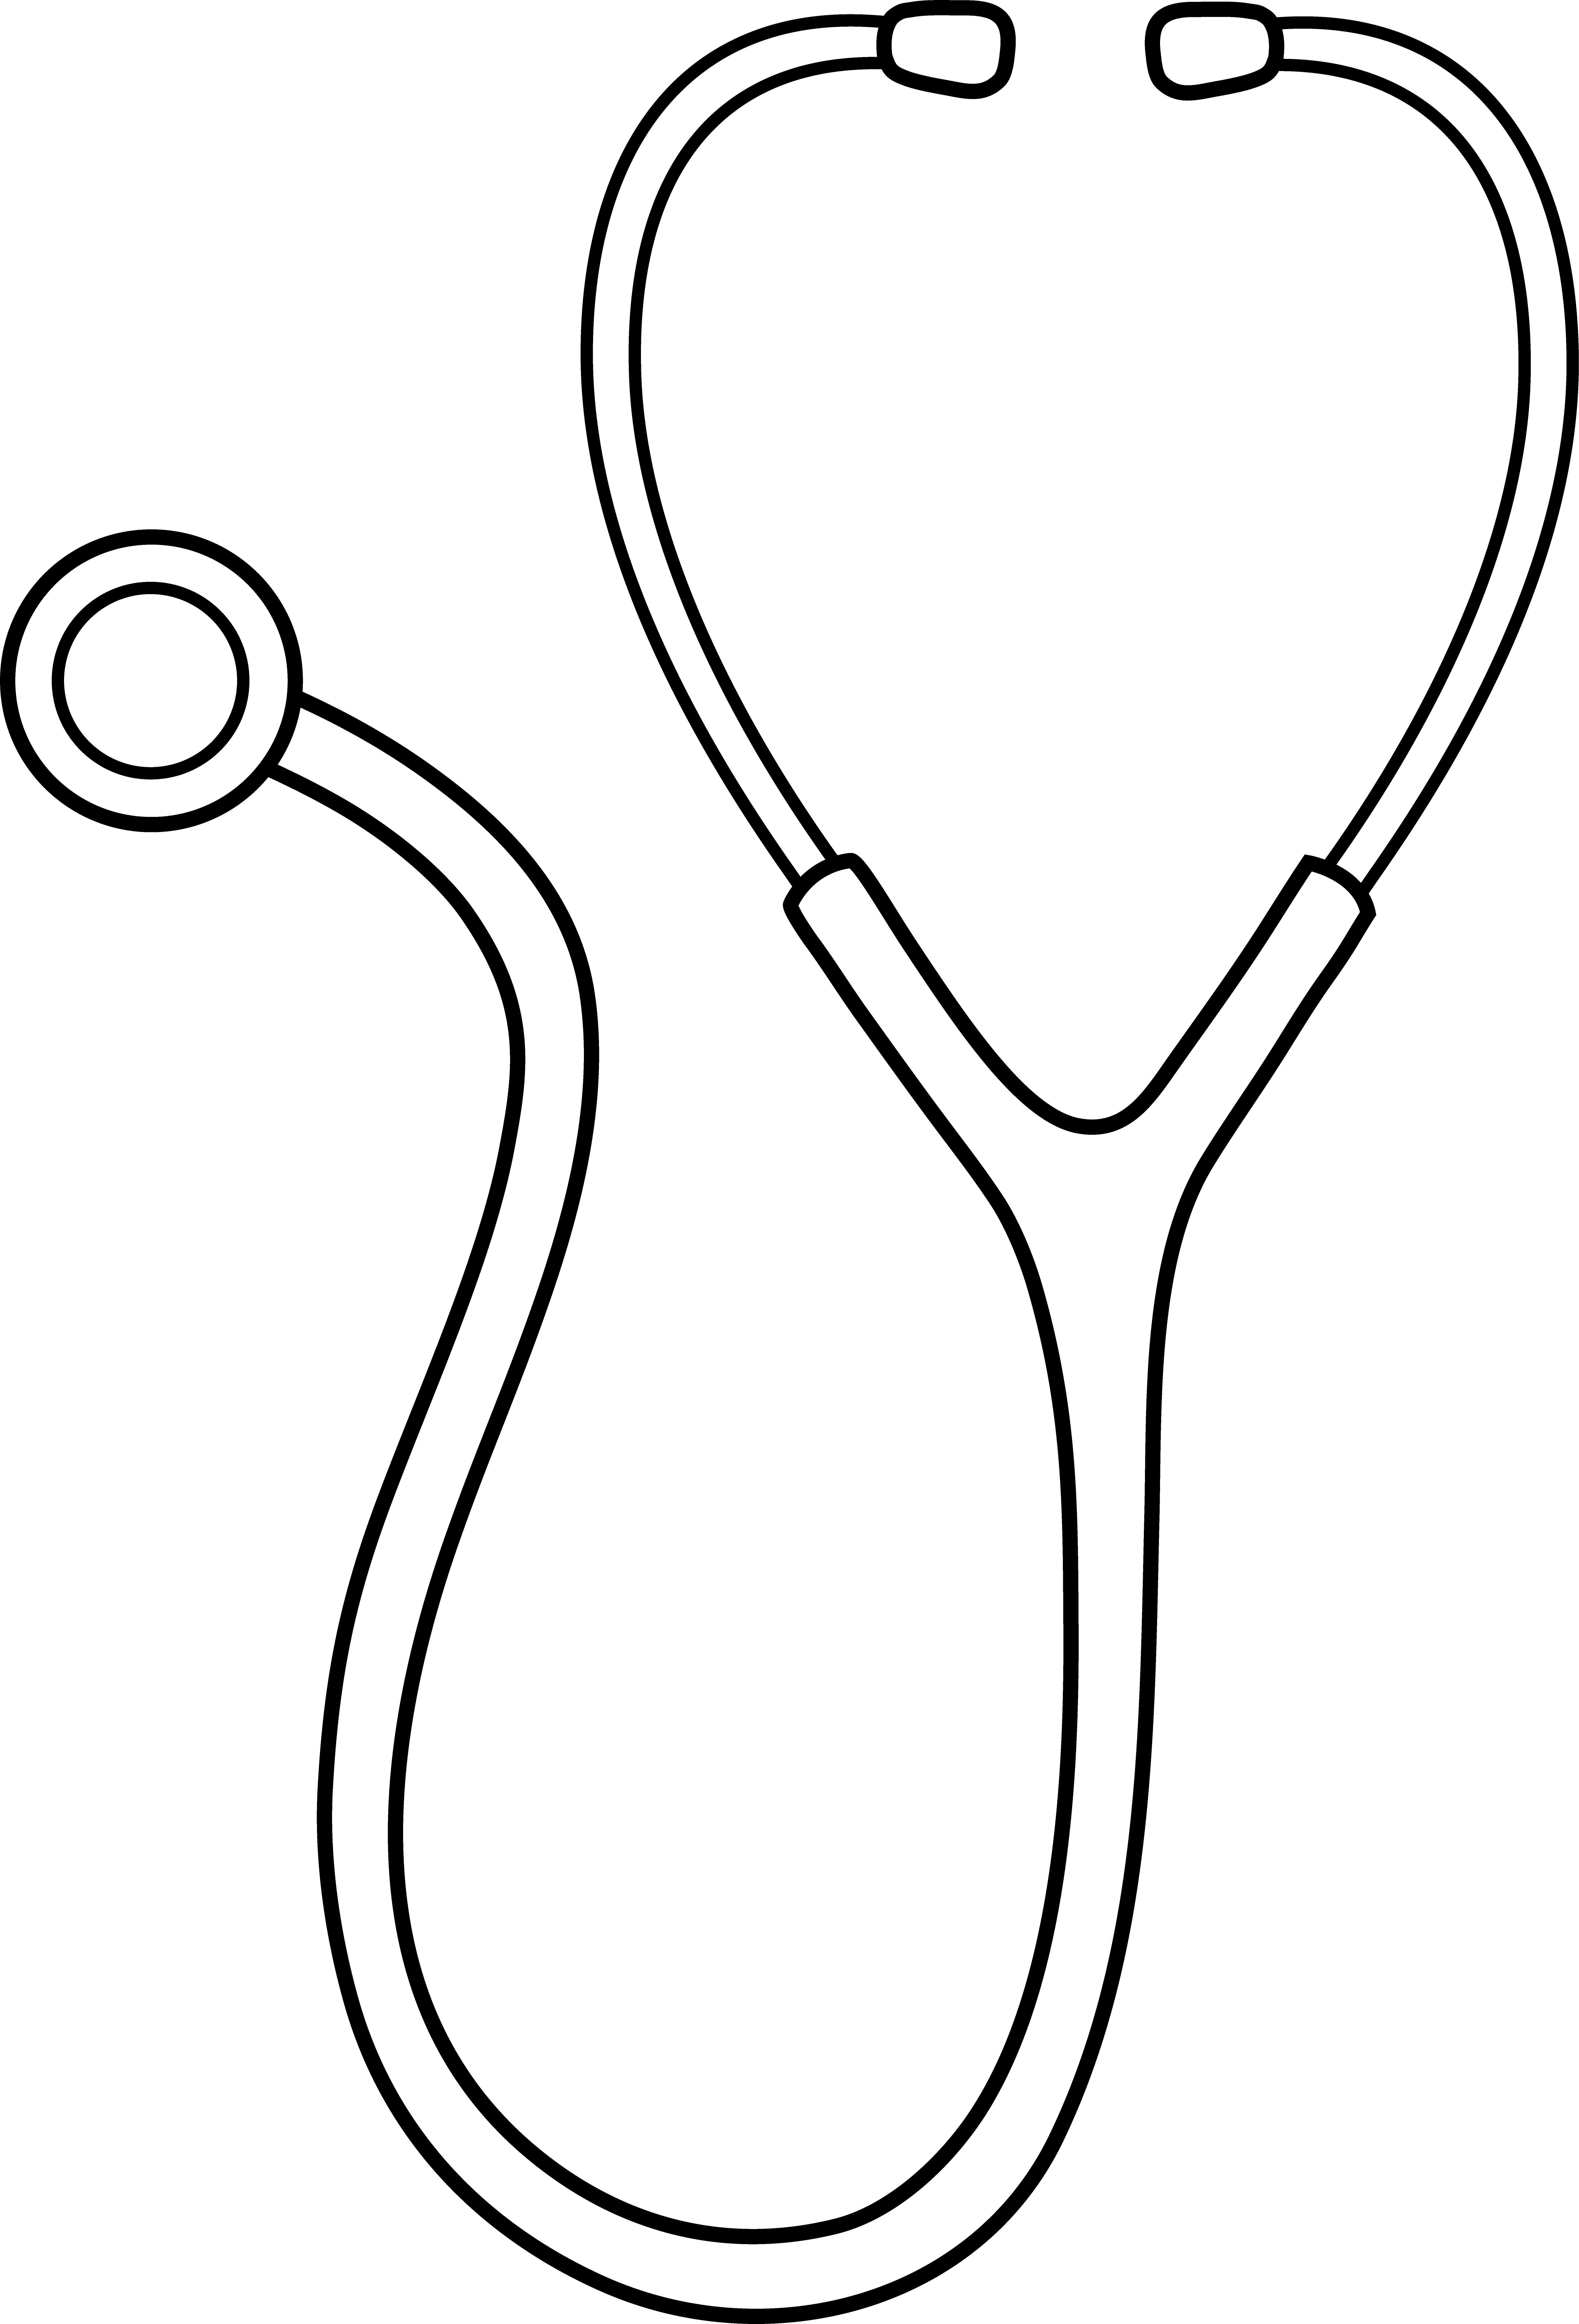 Free Picture Of Stethoscope, Download Free Clip Art, Free Clip Art ...